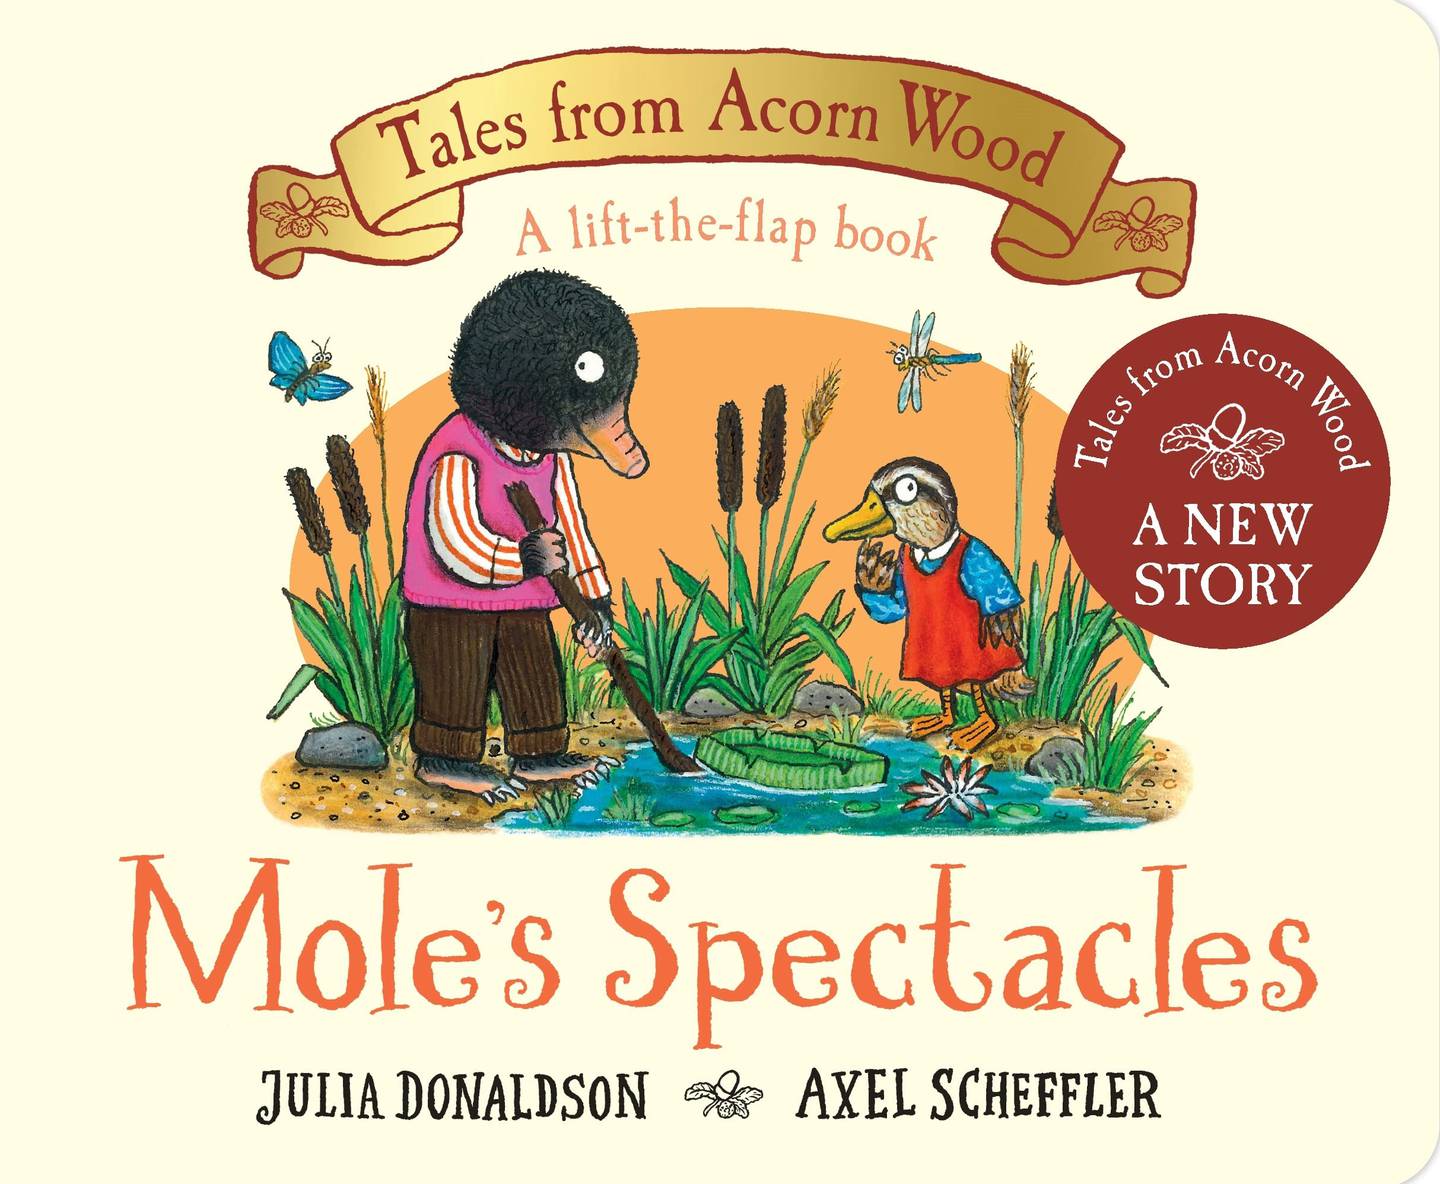 'Mole’s Spectacles' by Julia Donaldson is the latest in the multimillion-selling 'Tales from Acorn Wood' lift-the-flap picture book series. Photo: Macmillan